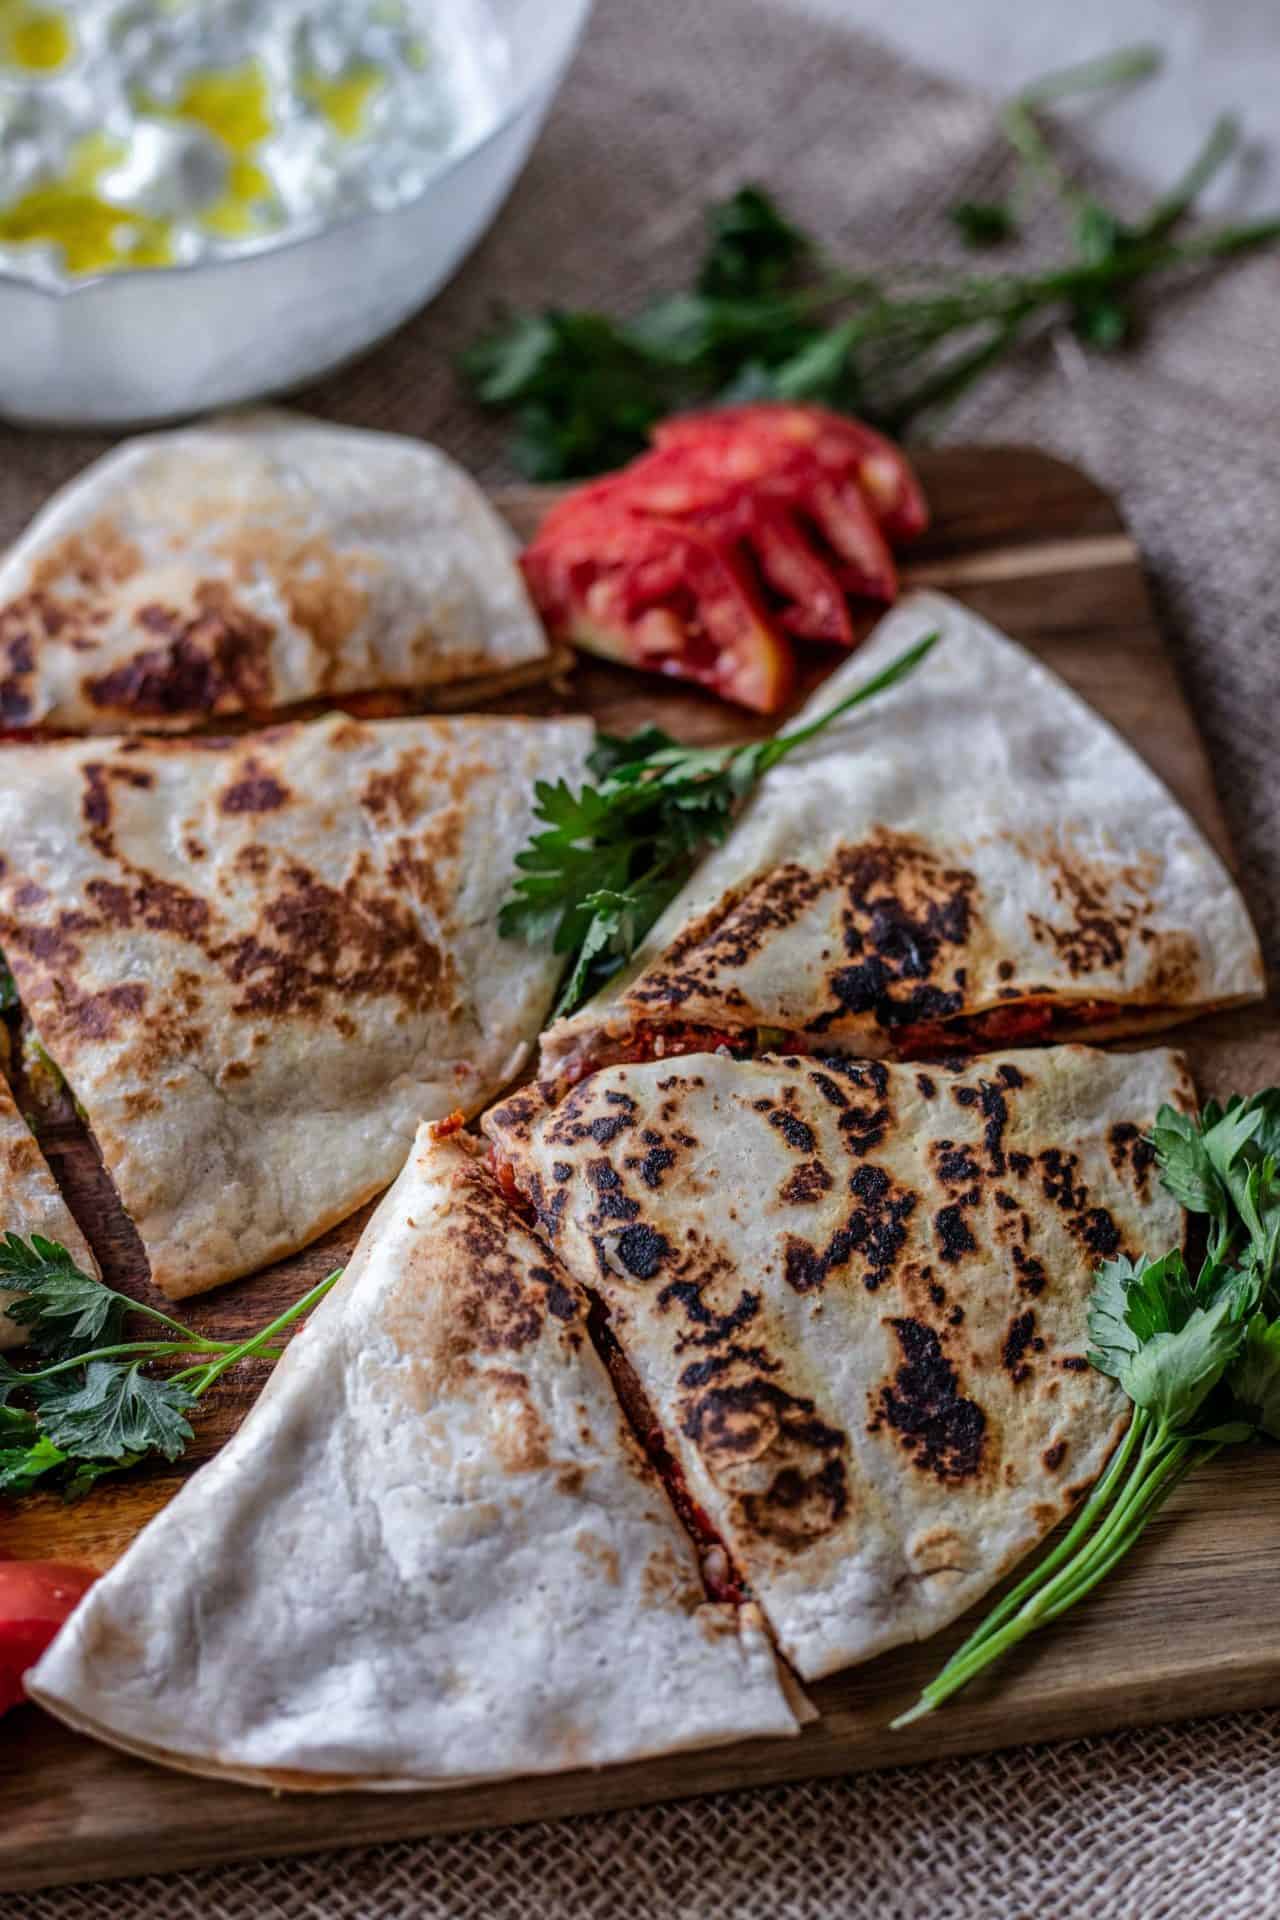 This Greek Quesadilla is bursting with Mediterranean flavours, moreover is very light, simple to make and so delicious!